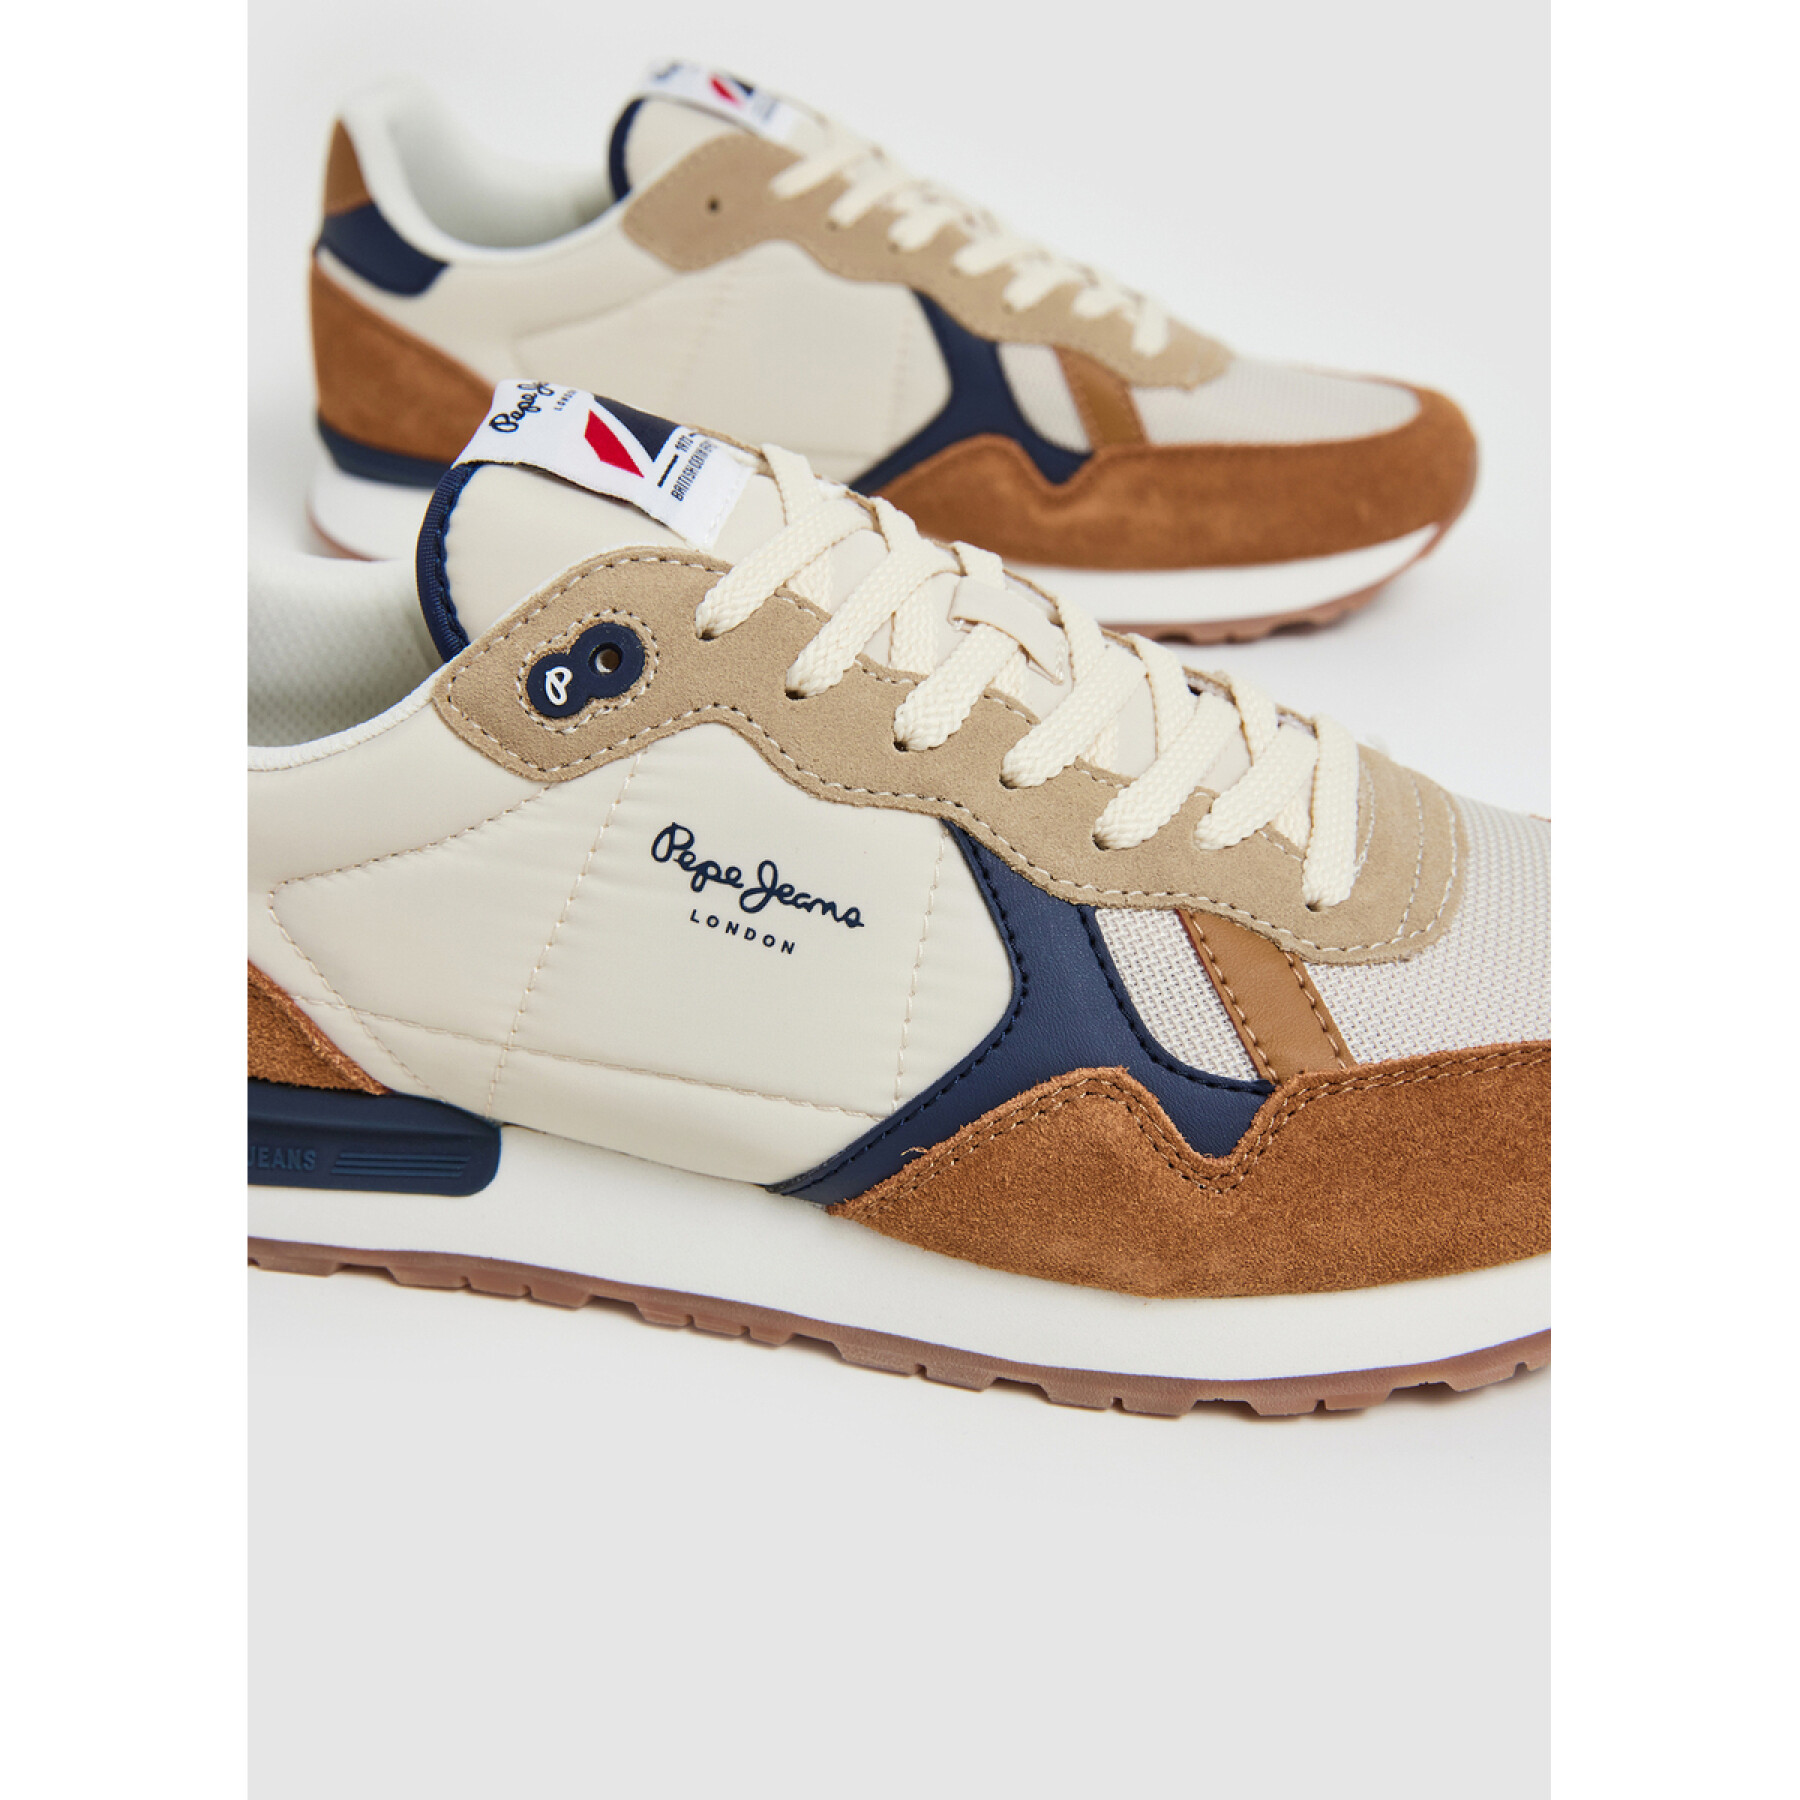 Sneakers Pepe Jeans Brit Mix